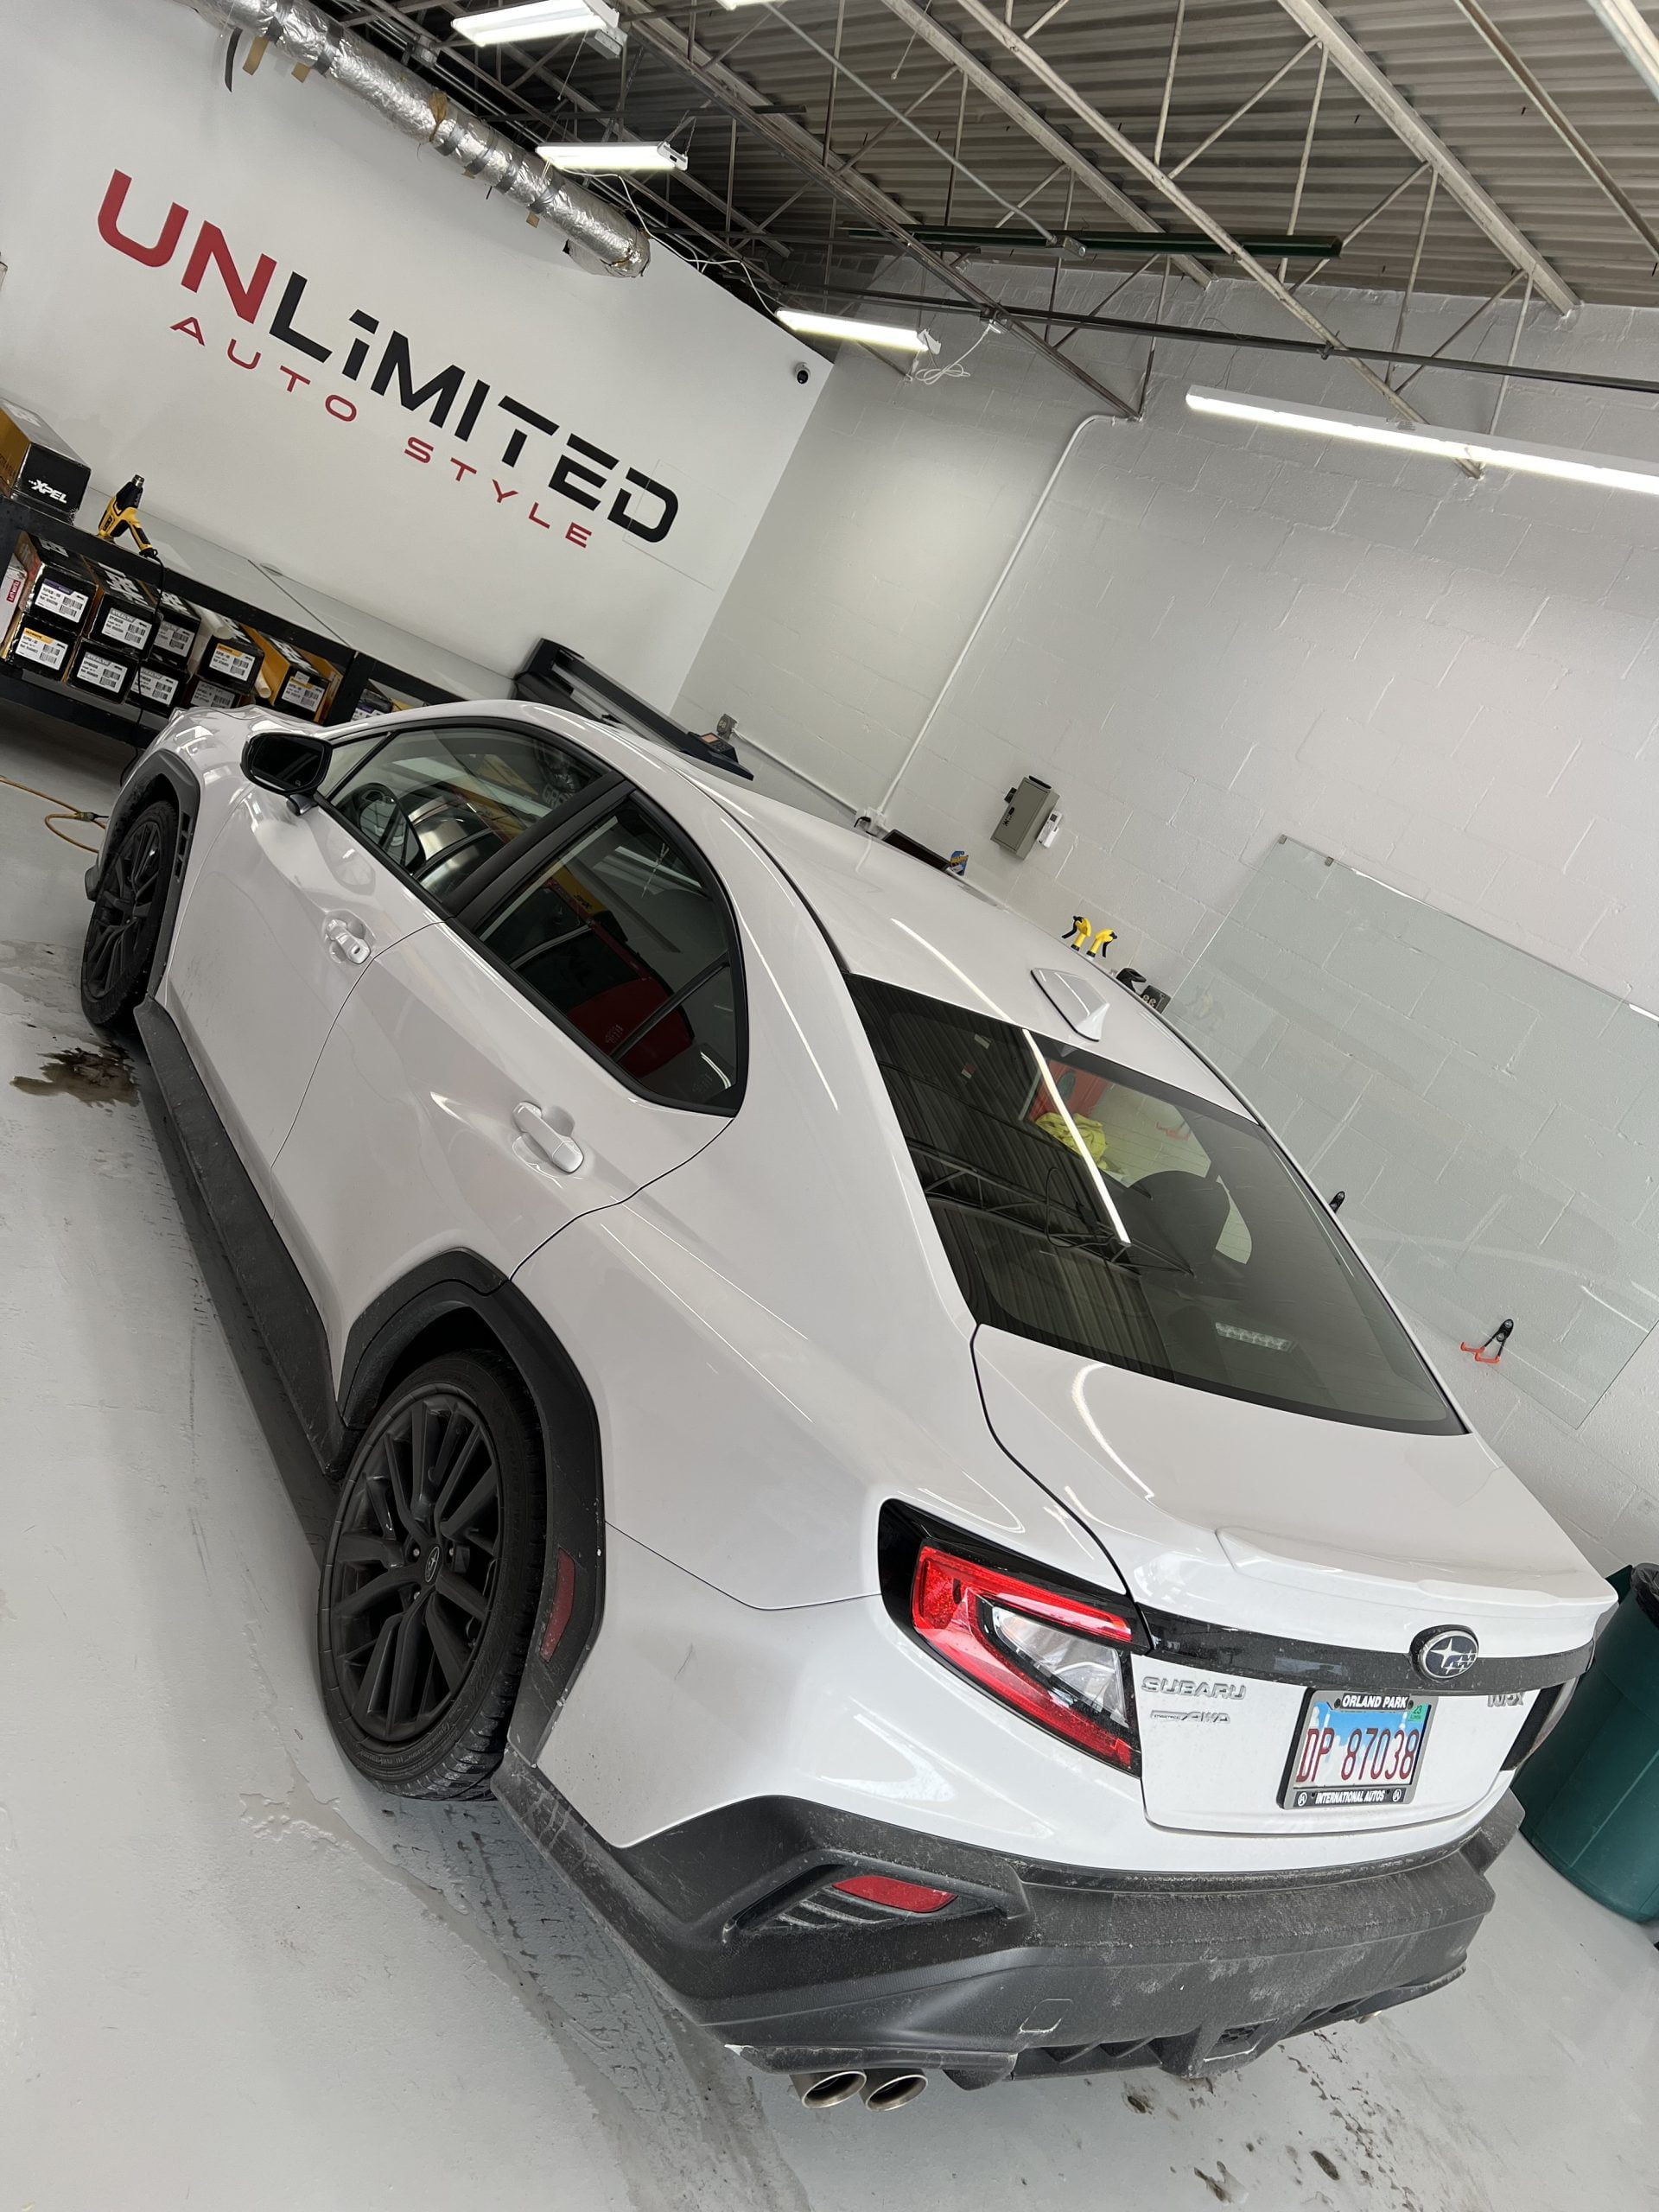 Install XPEL Paint Protection Film at Tinting Chicago